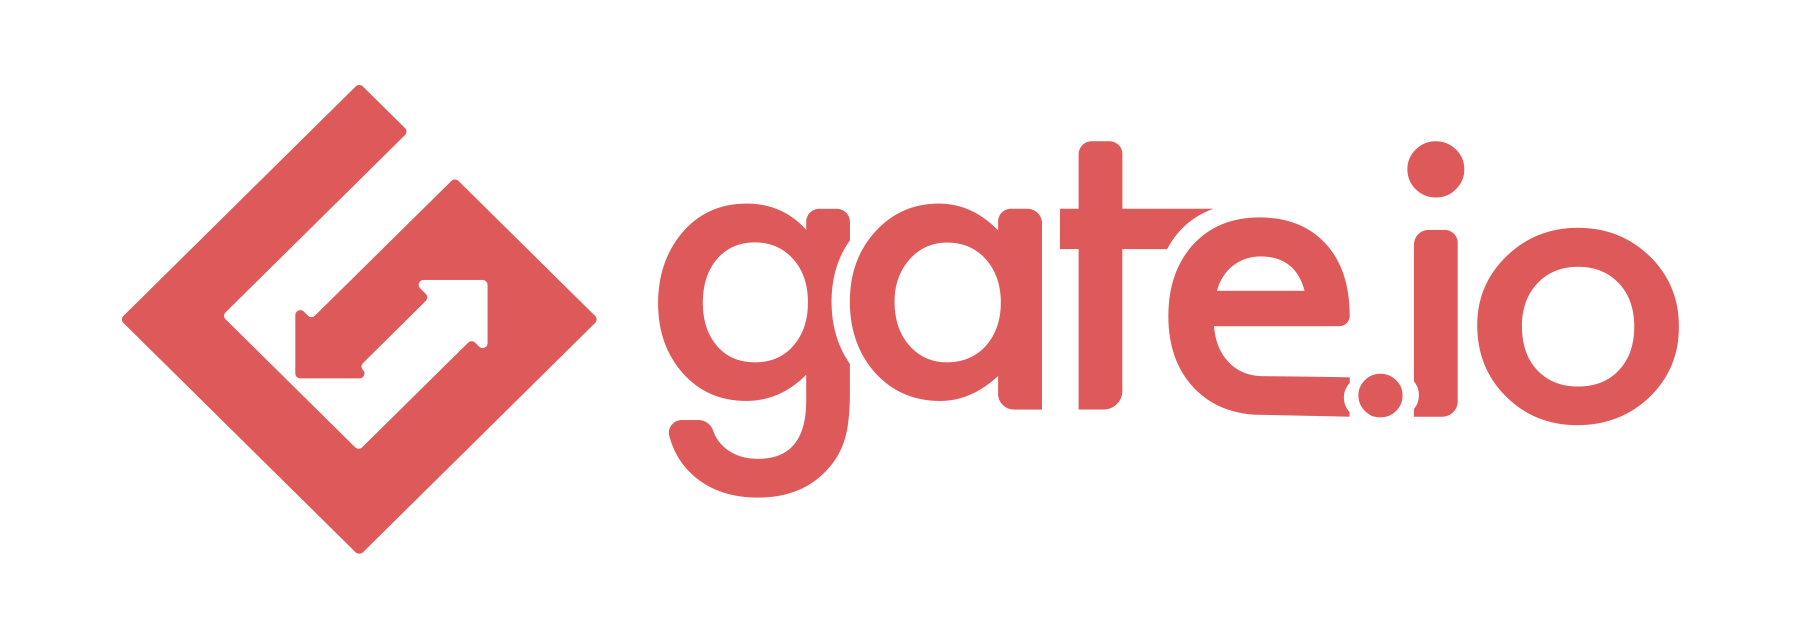 Gate.io to Unveil New Brand Identity During 9th Birthday Celebrations in Late May 2022 - 2